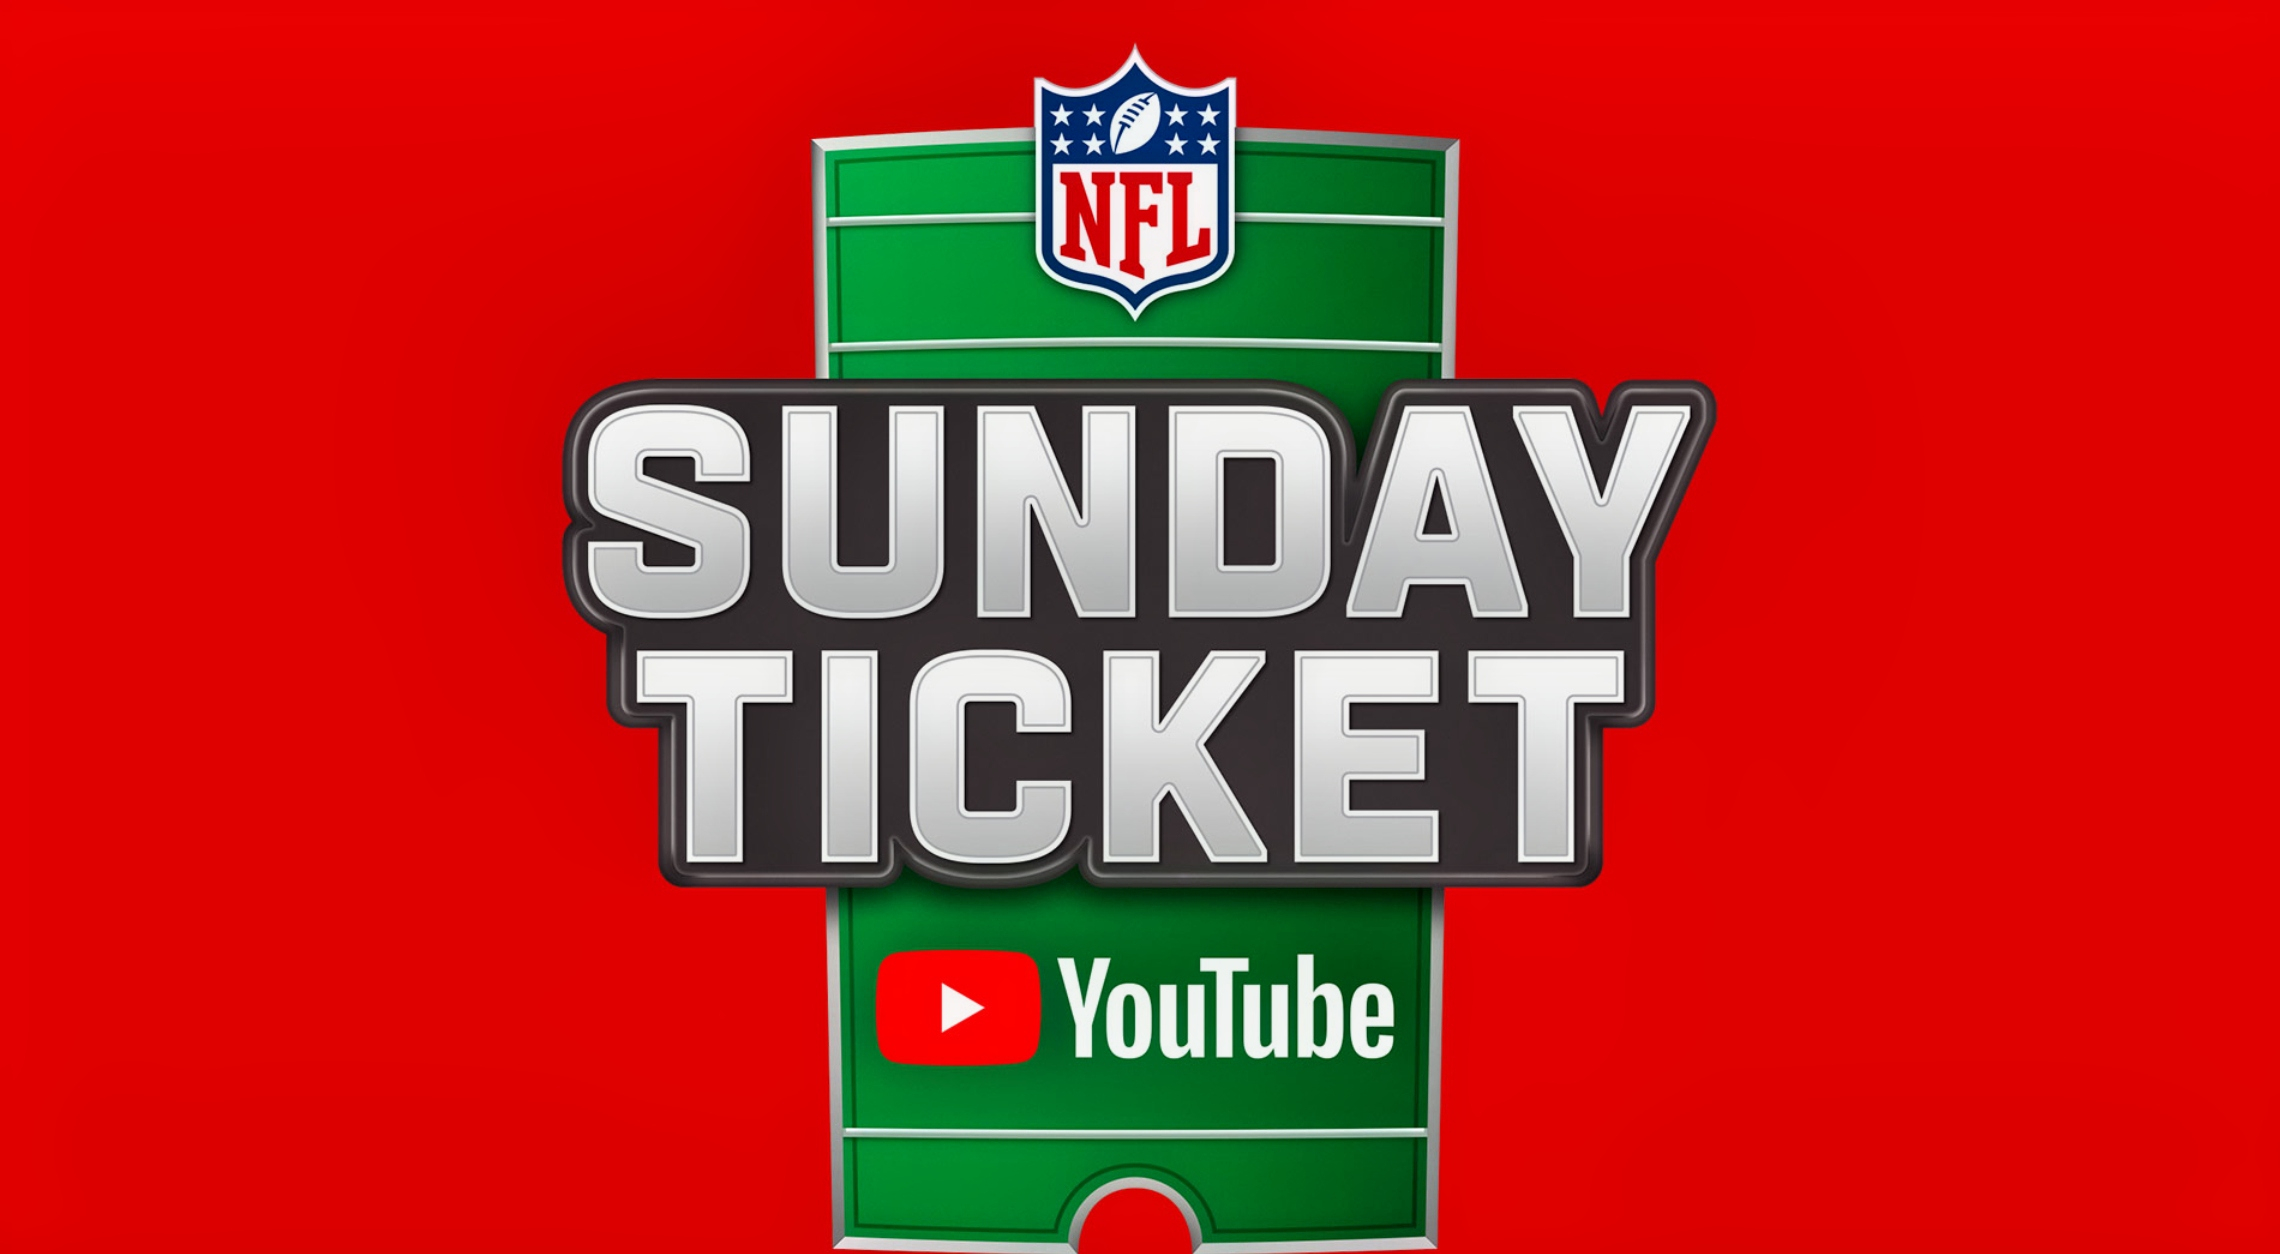 YouTube To Offer Student Plans For NFL Sunday Ticket